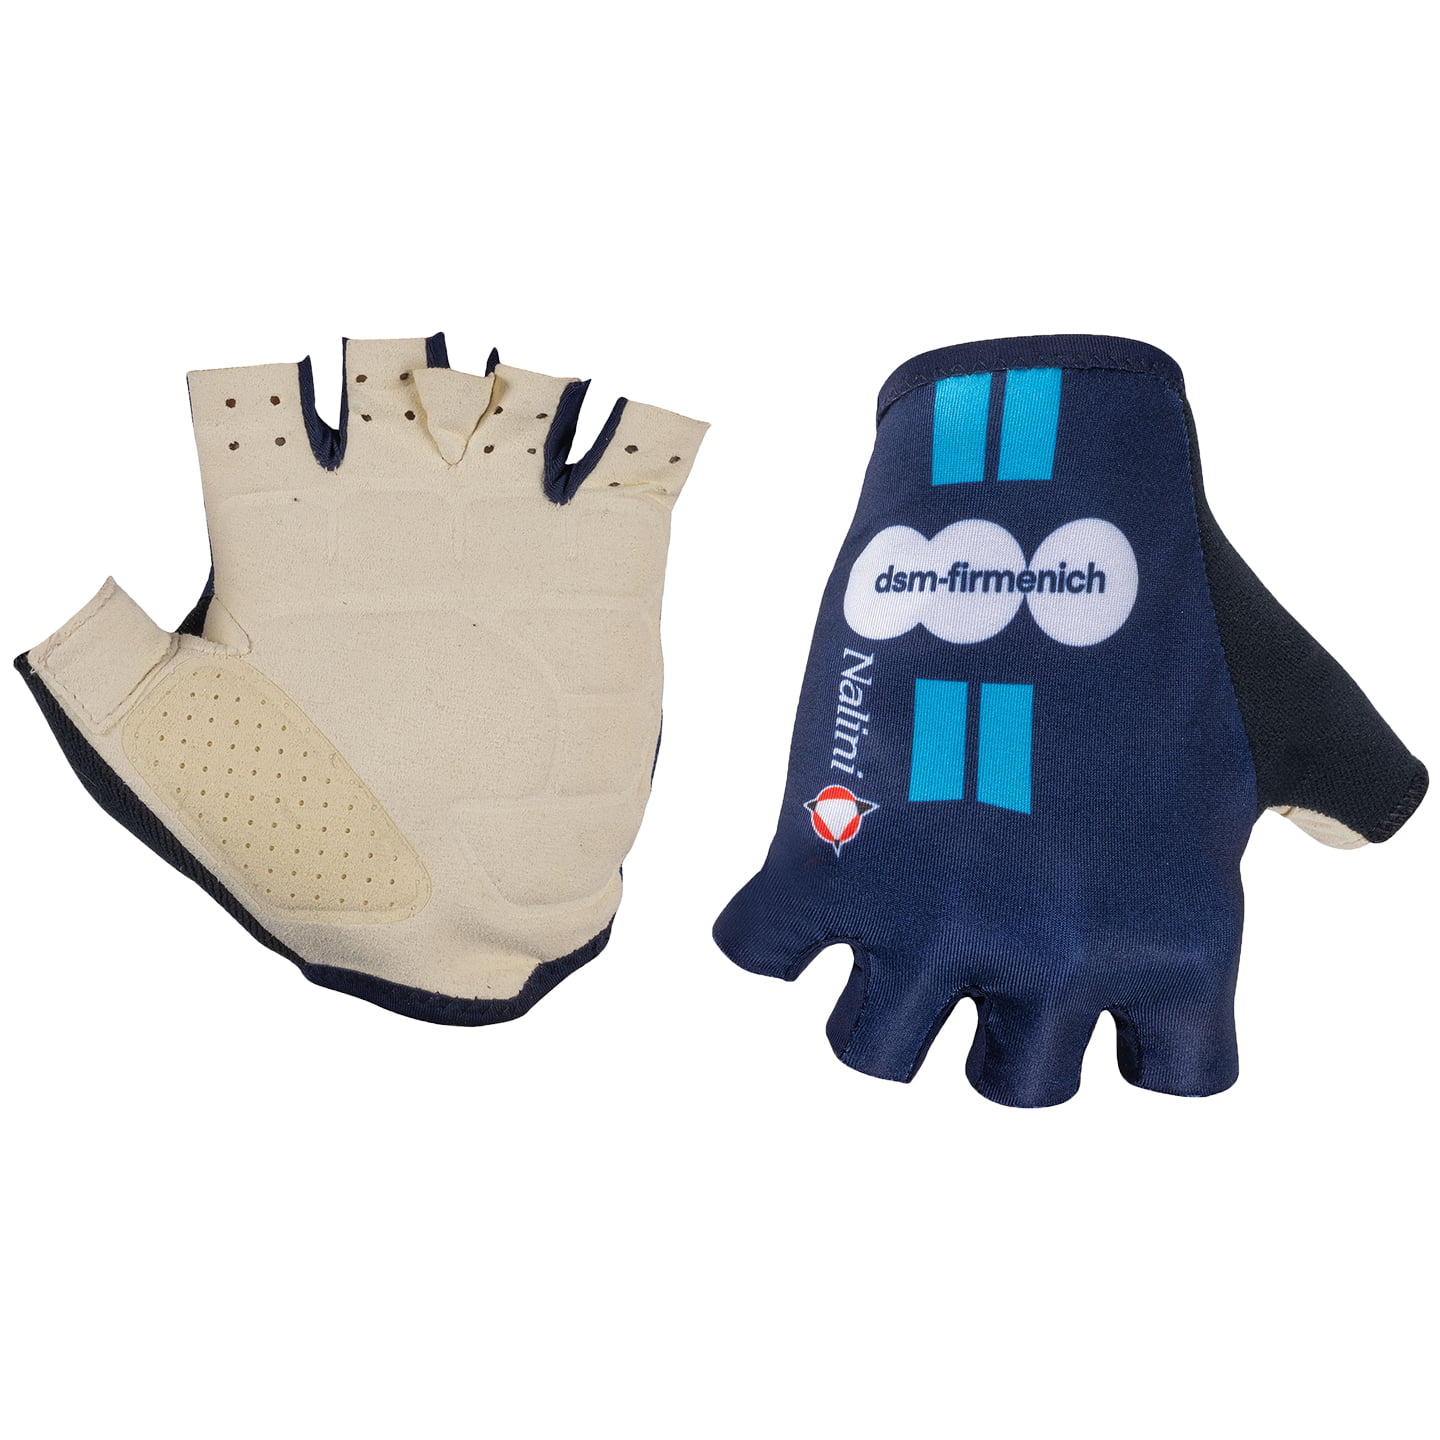 TEAM DSM TdF 2023 Cycling Gloves, for men, size S, Cycling gloves, Cycling clothing